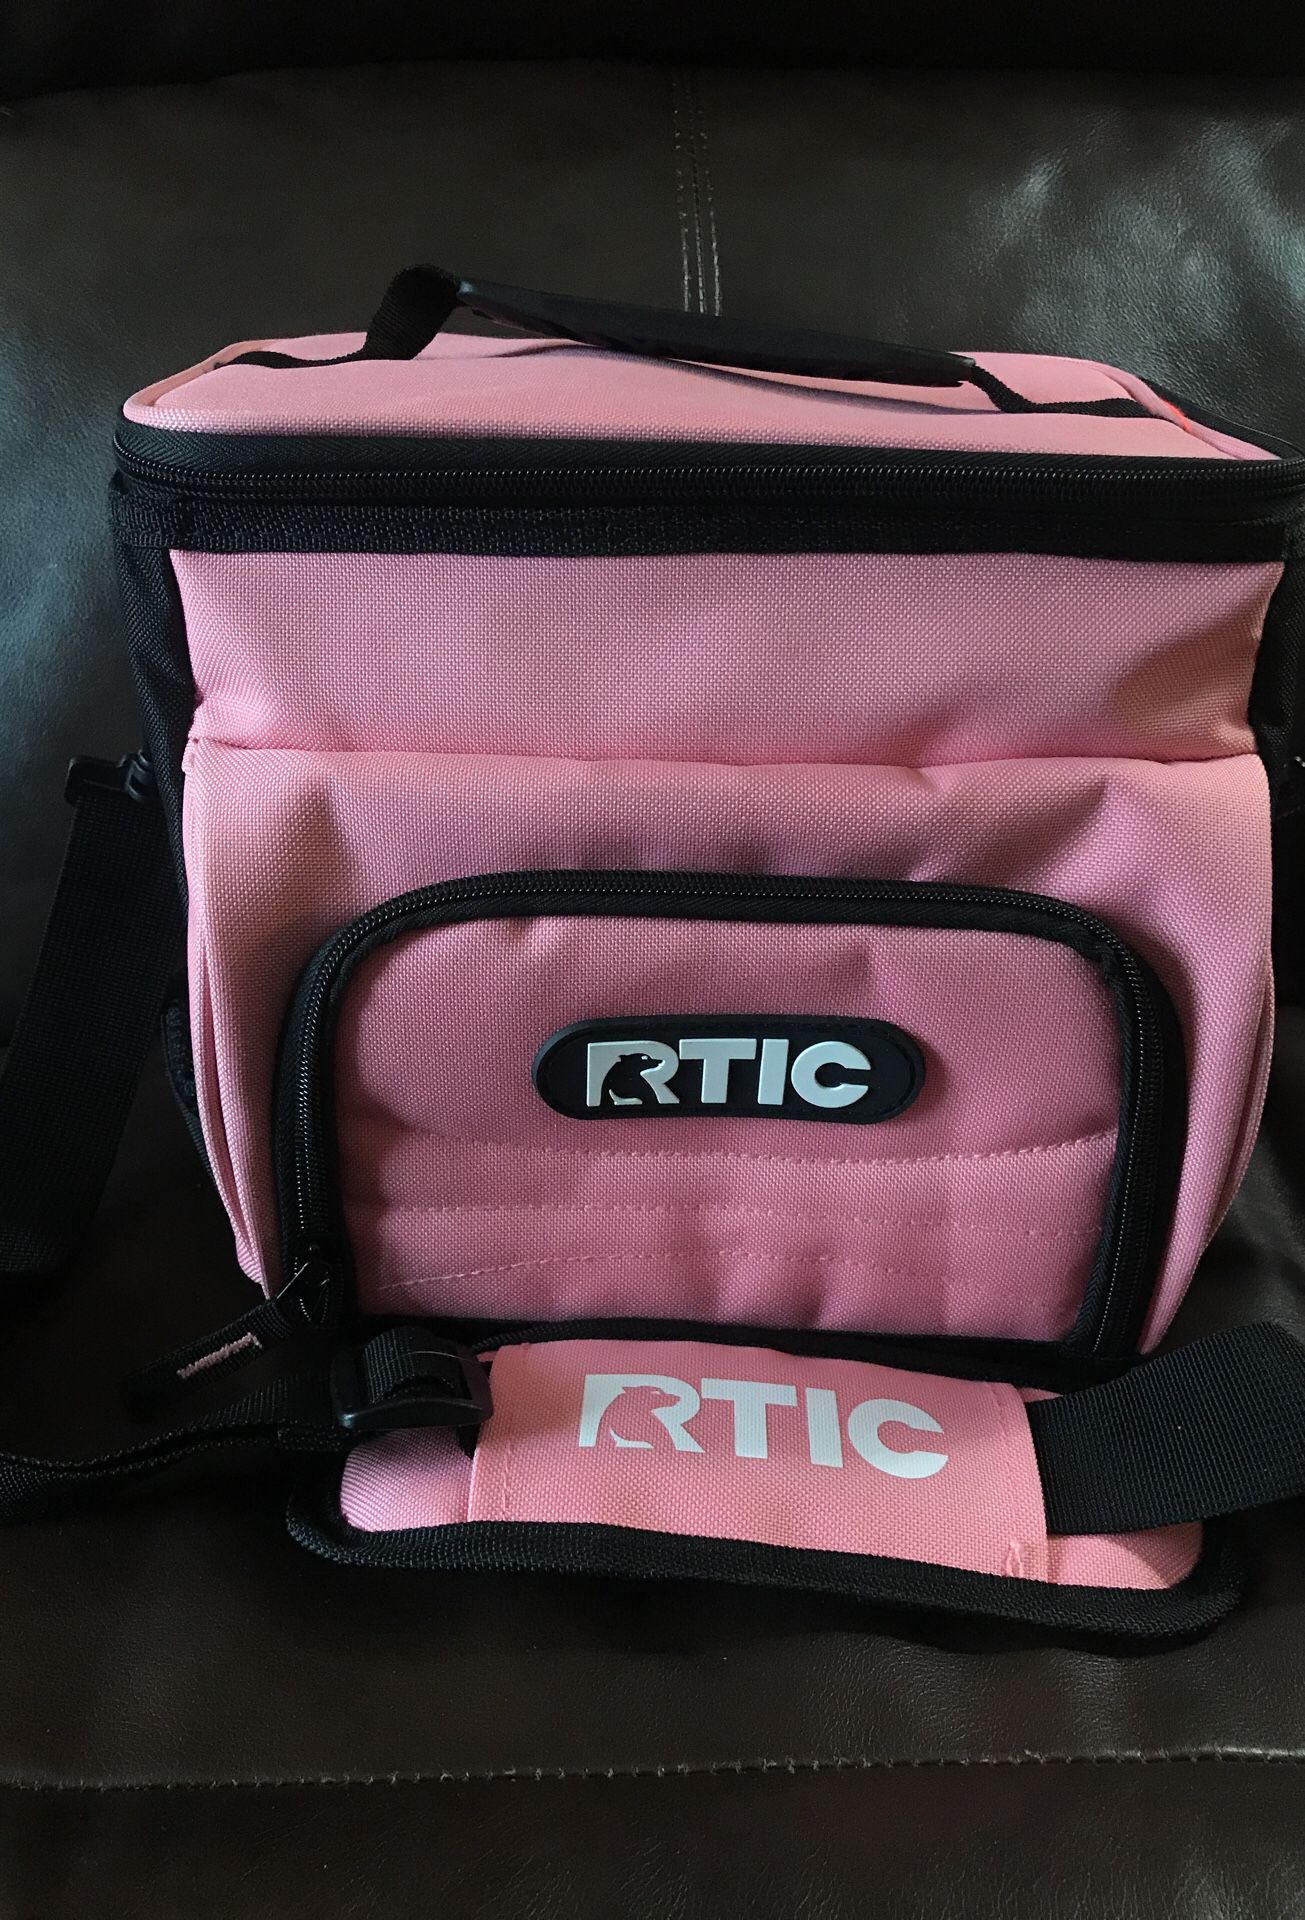 Rtic lunch bag/cooler